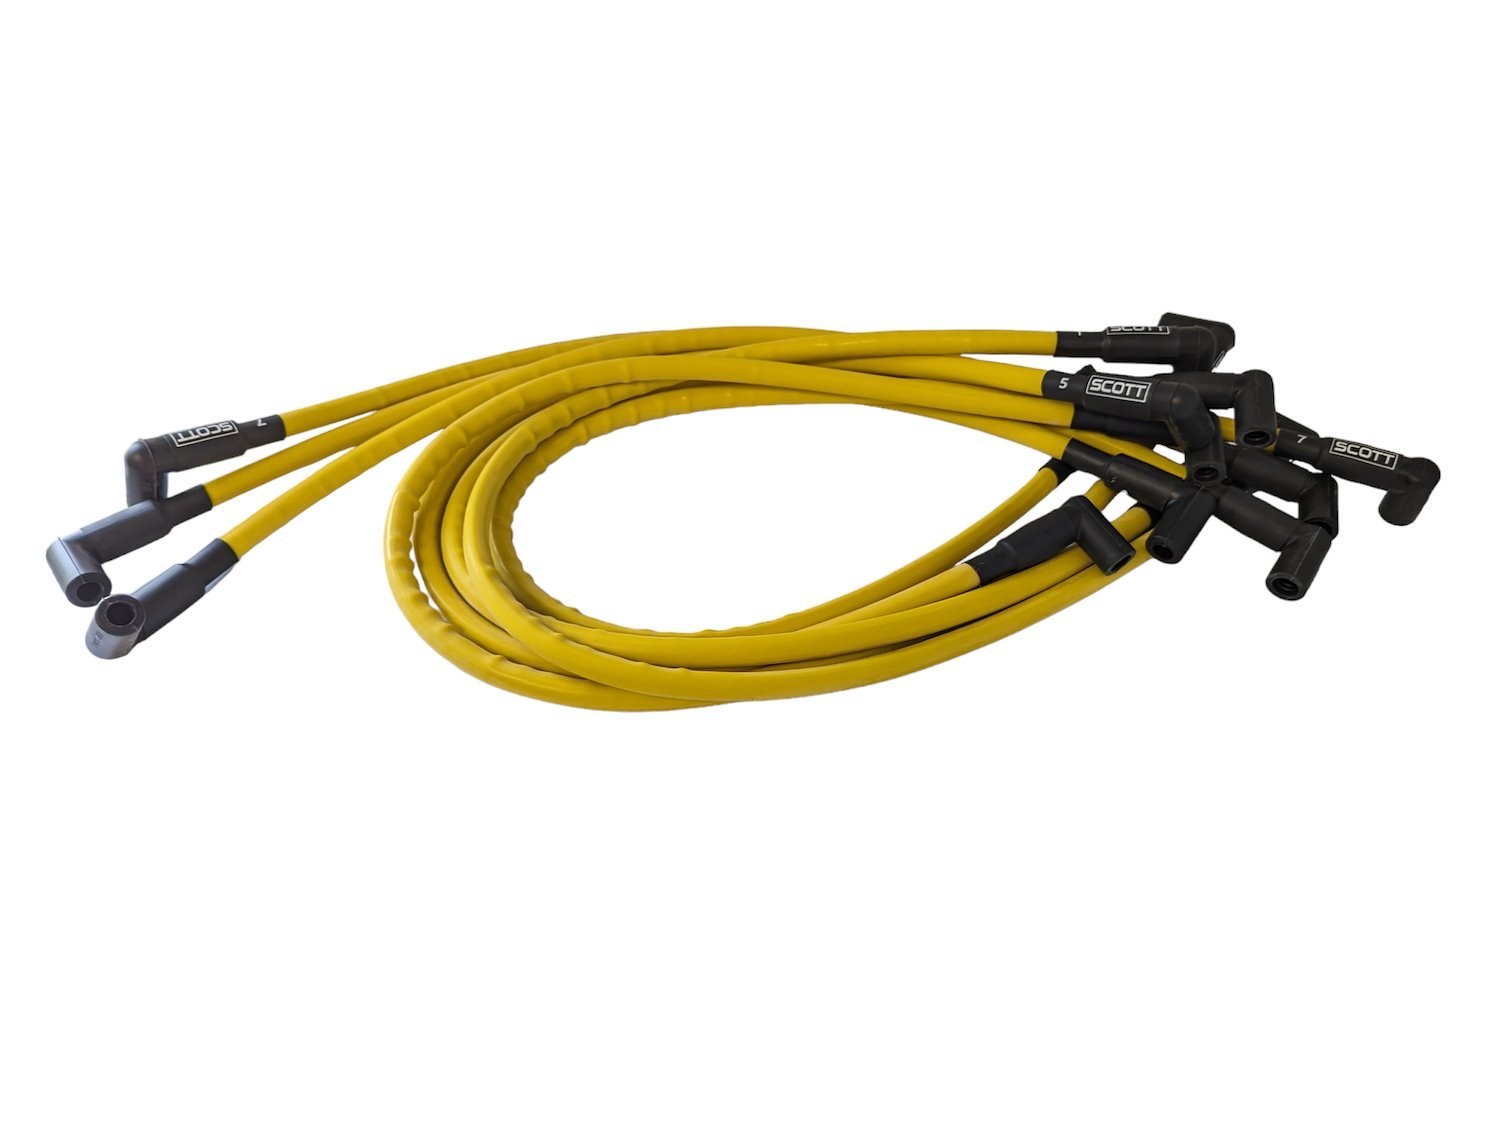 SPW-CH-430-7 High-Performance Silicone-Sleeved Spark Plug Wire Set for Big Block Ford, Under Header [Yellow]